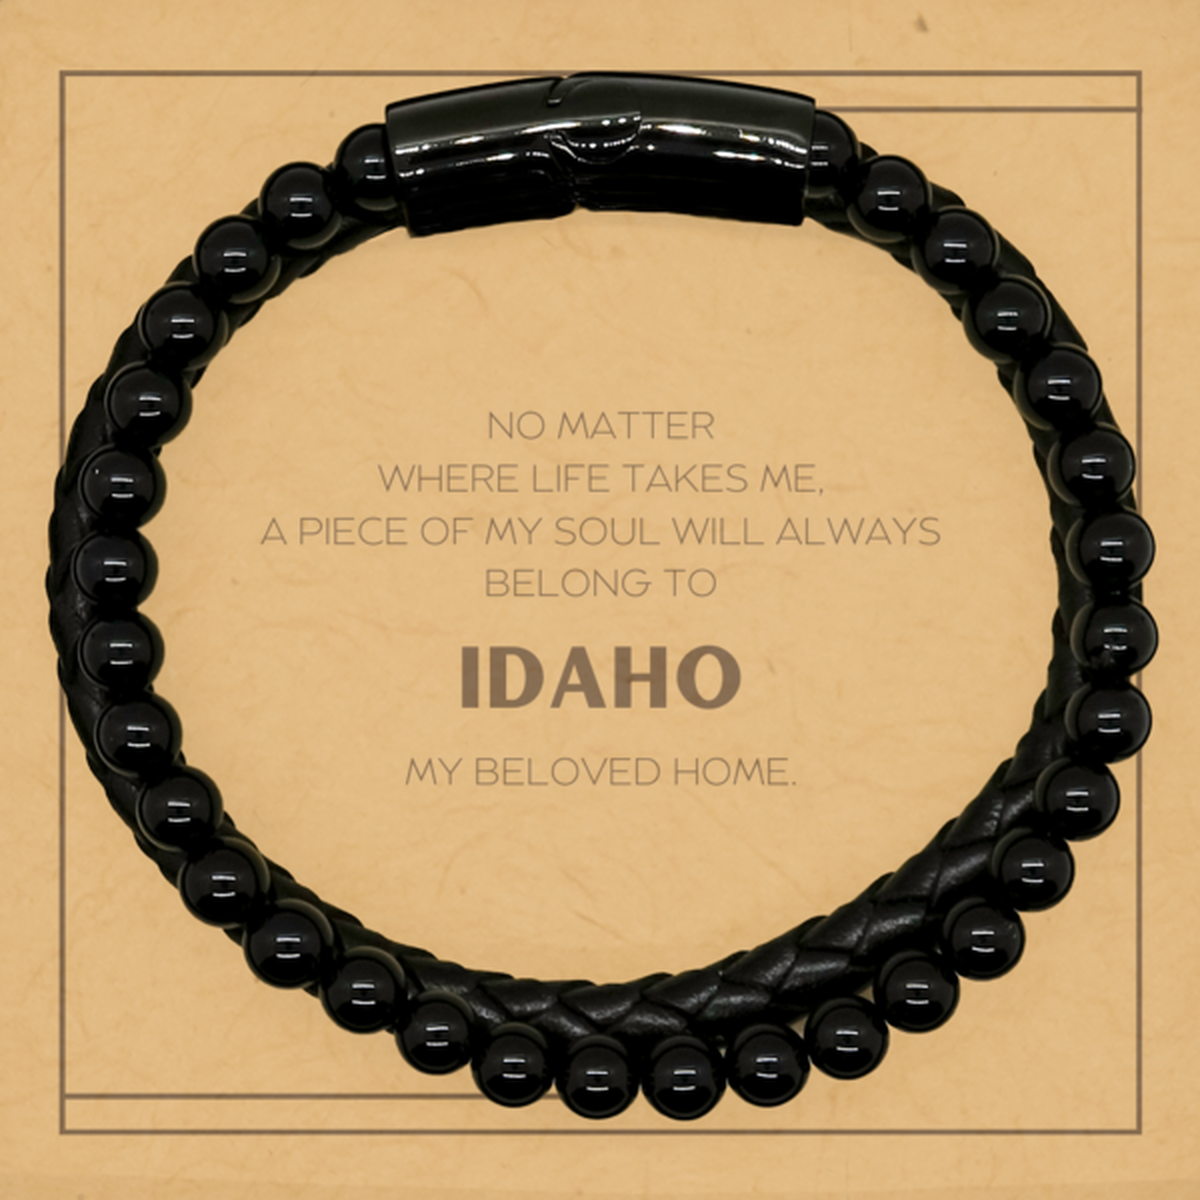 Love Idaho State Gifts, My soul will always belong to Idaho, Proud Stone Leather Bracelets, Birthday Unique Gifts For Idaho Men, Women, Friends